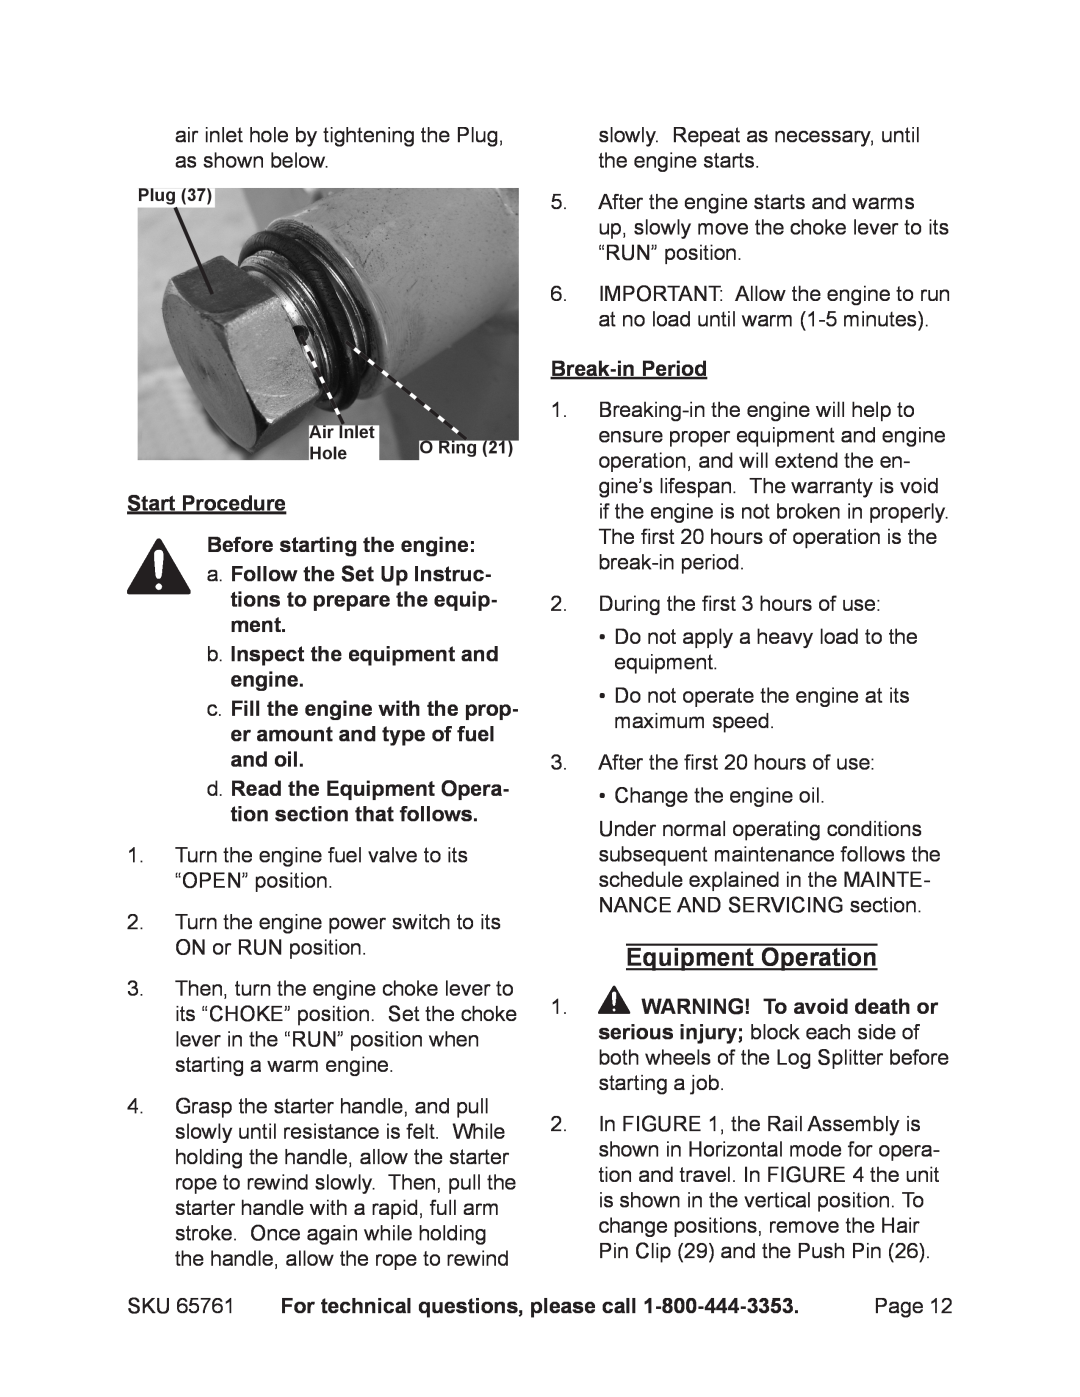 Harbor Freight Tools 65761 manual Start Procedure, Before starting the engine a. Follow the Set Up Instruc, Break-in Period 